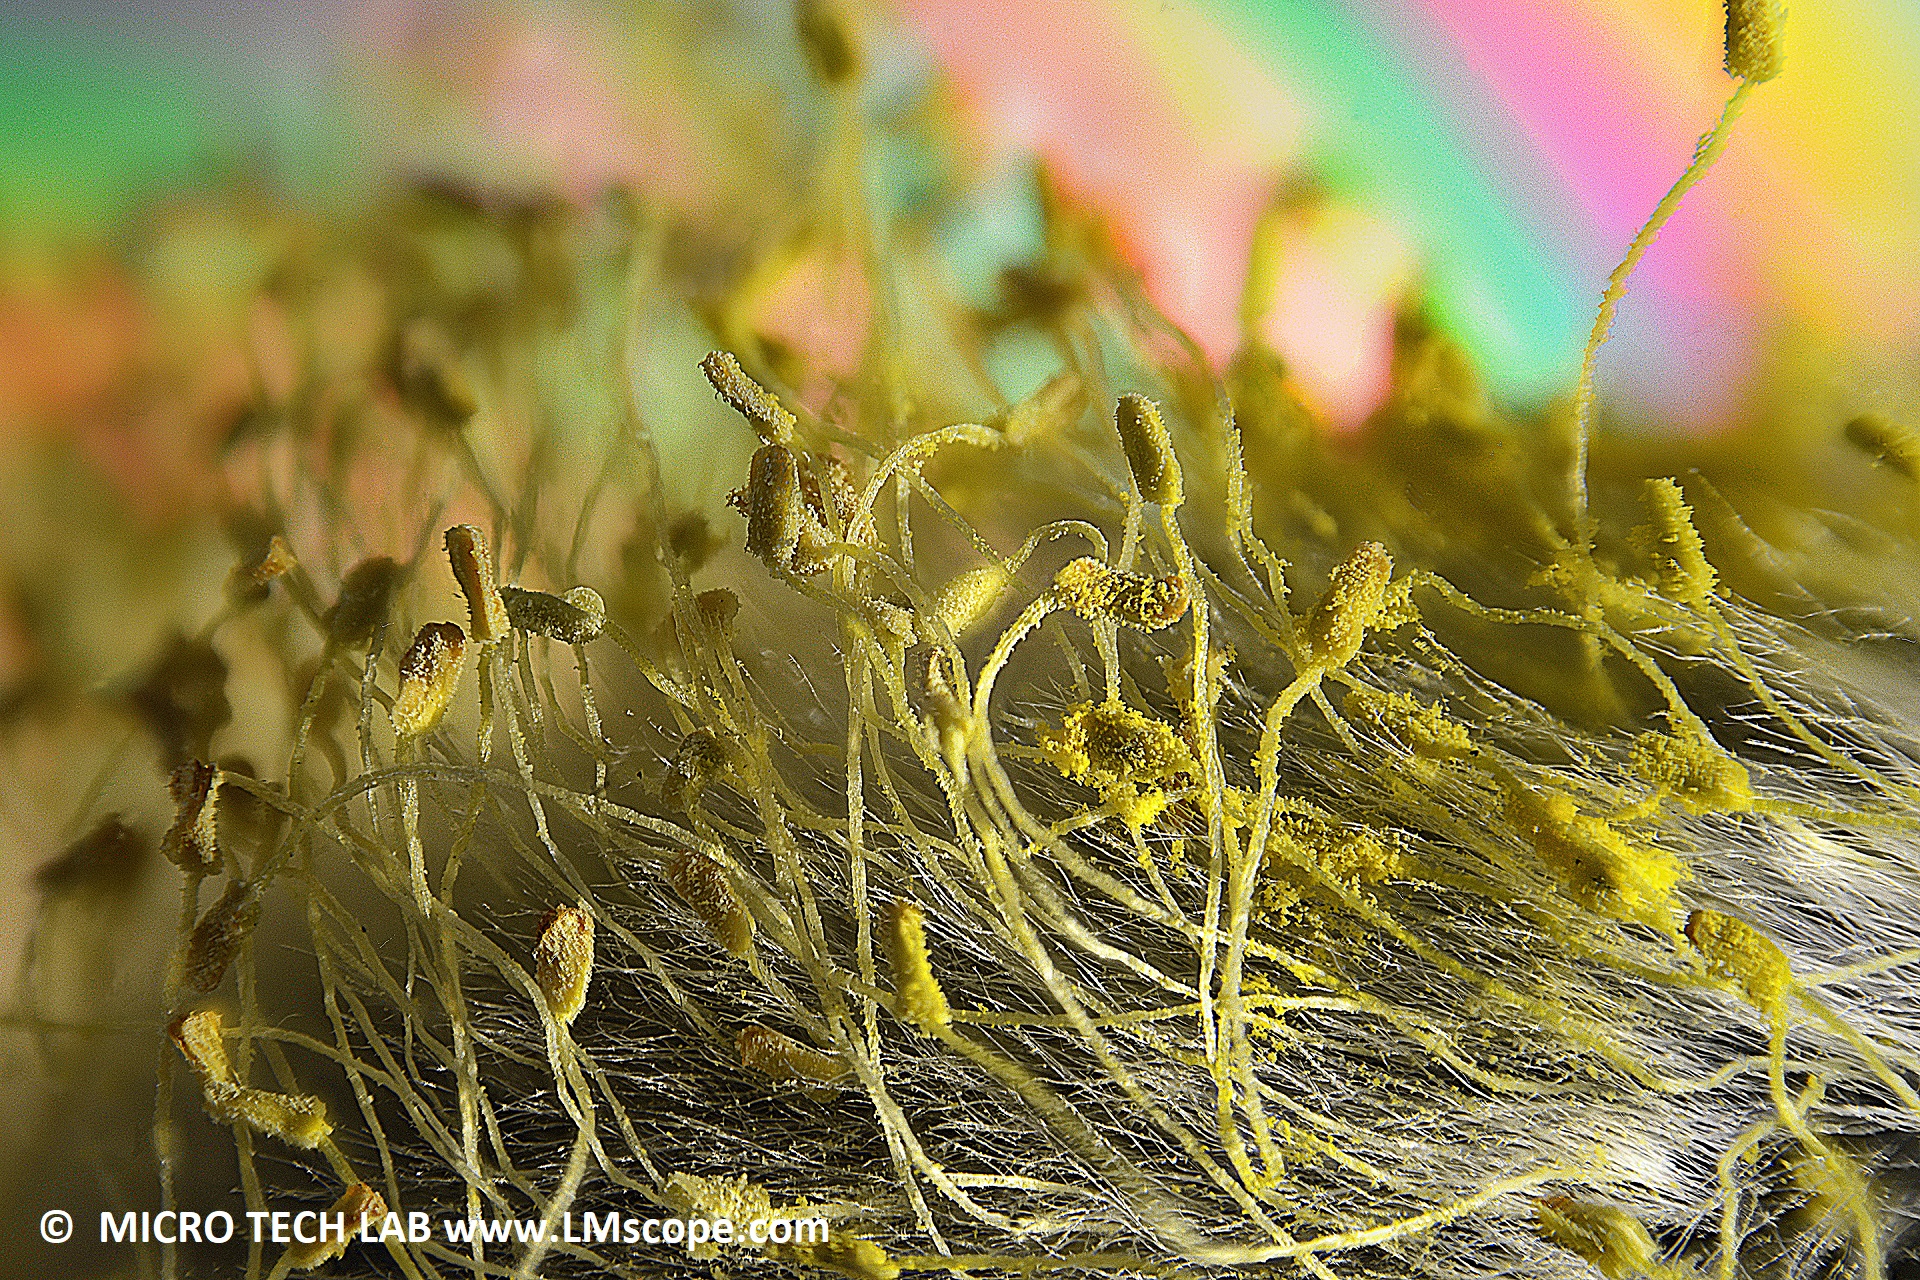 Watching the flowers of the pasture: catkins under the LM macroscope